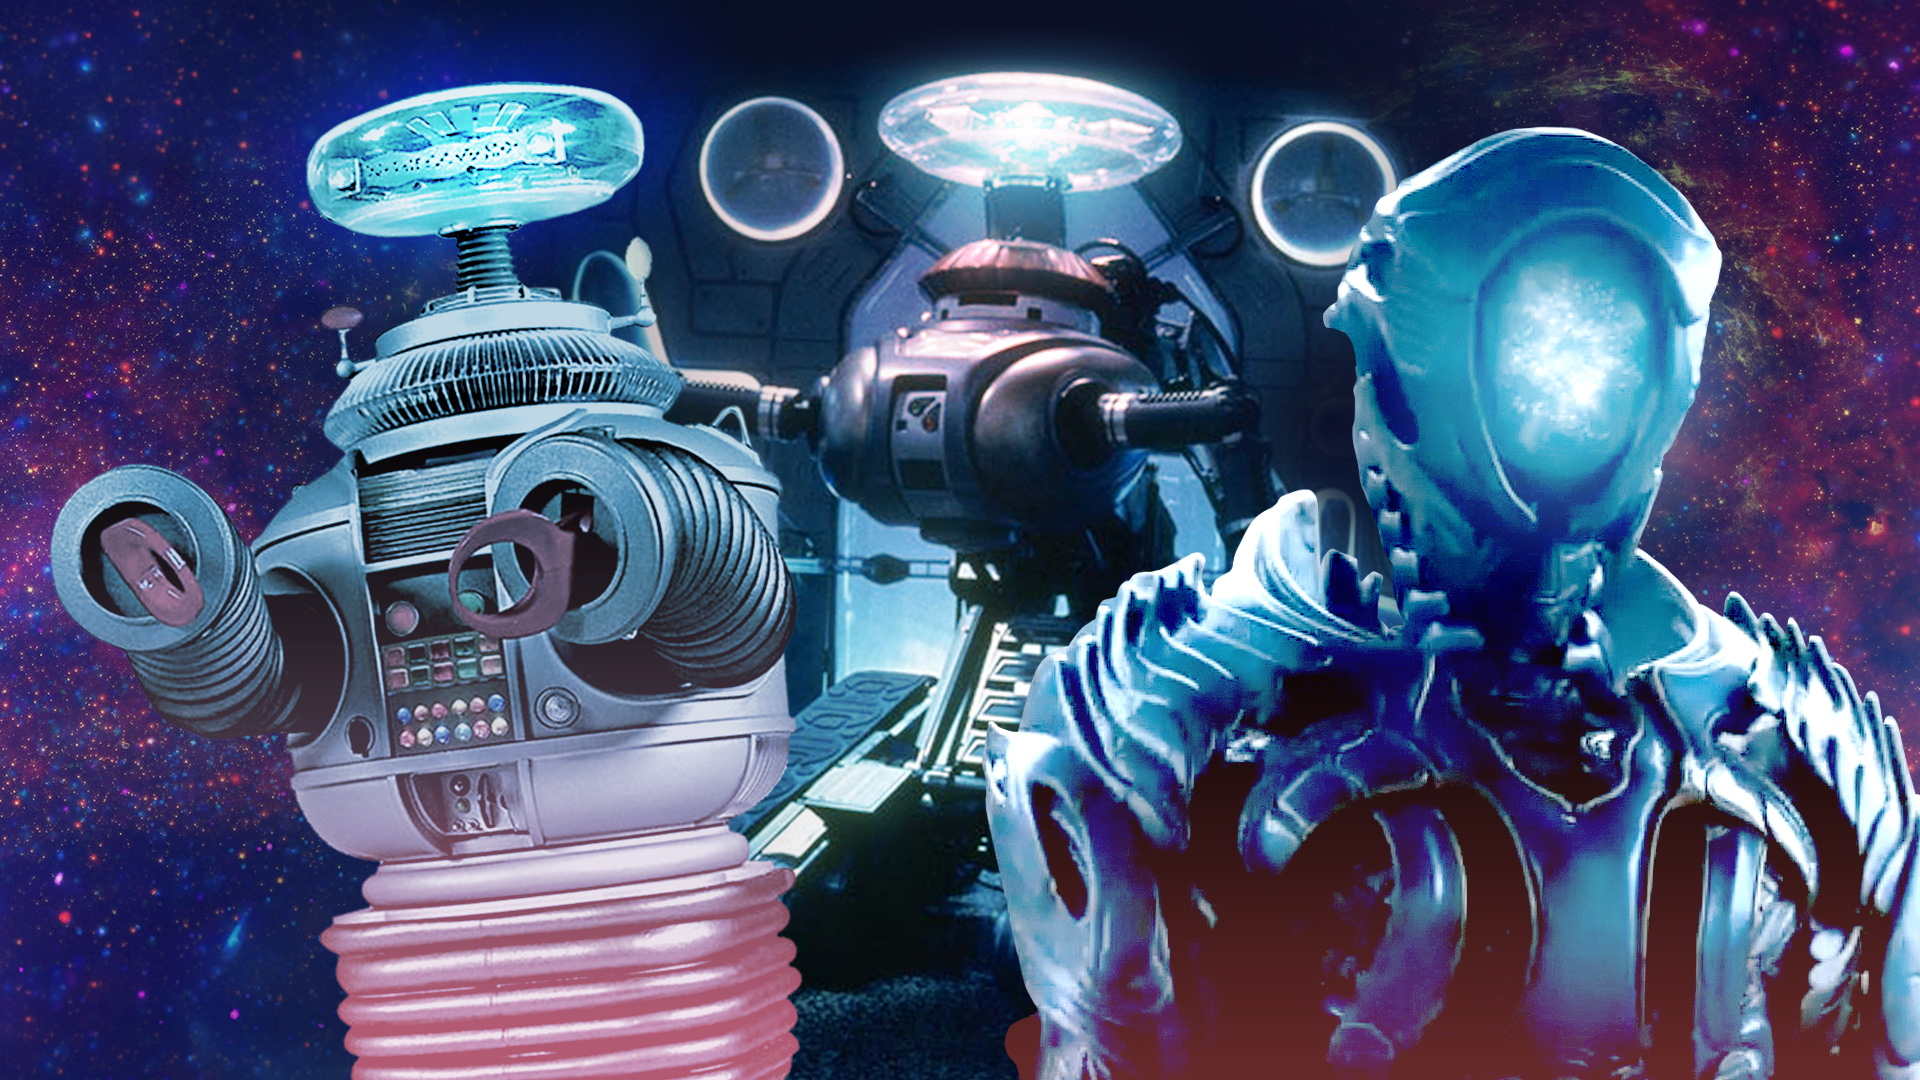 Lost In Space Robot Images Wallpapers